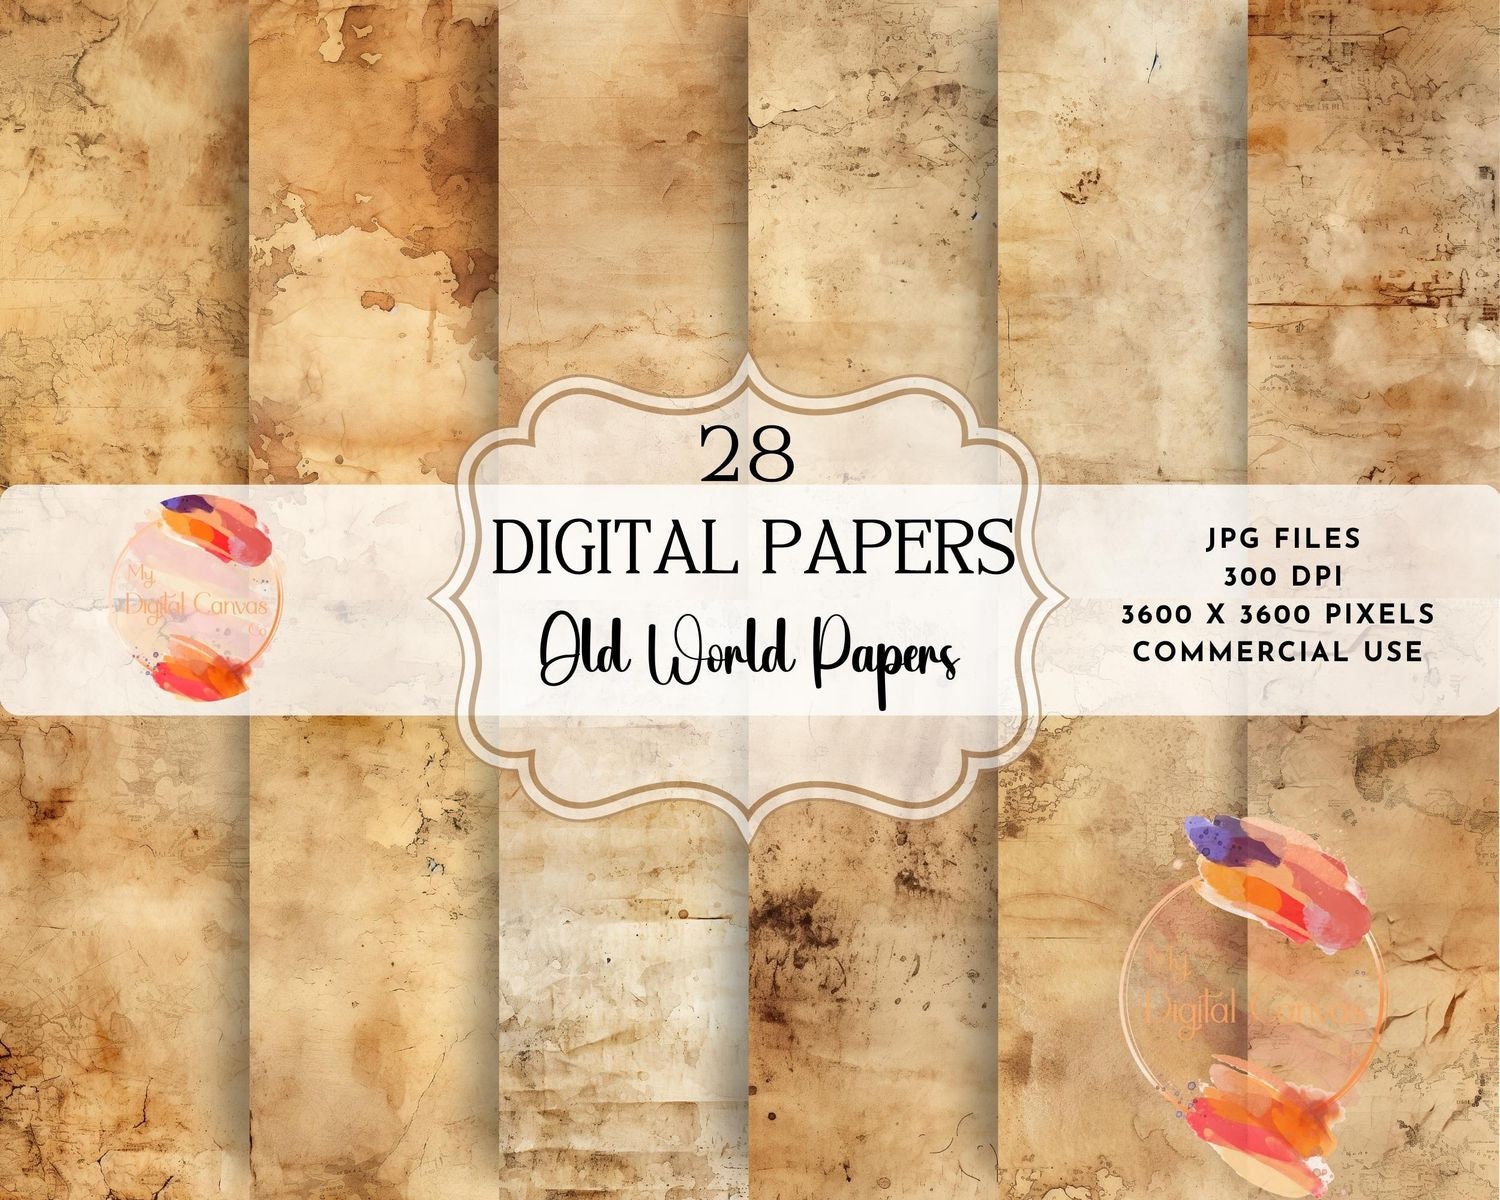 Vintage Paper Paintings I Digital Painted Paper Images of Old Paper Aged  Paper Backgrounds Antique Paper Textures Vintage Paper 